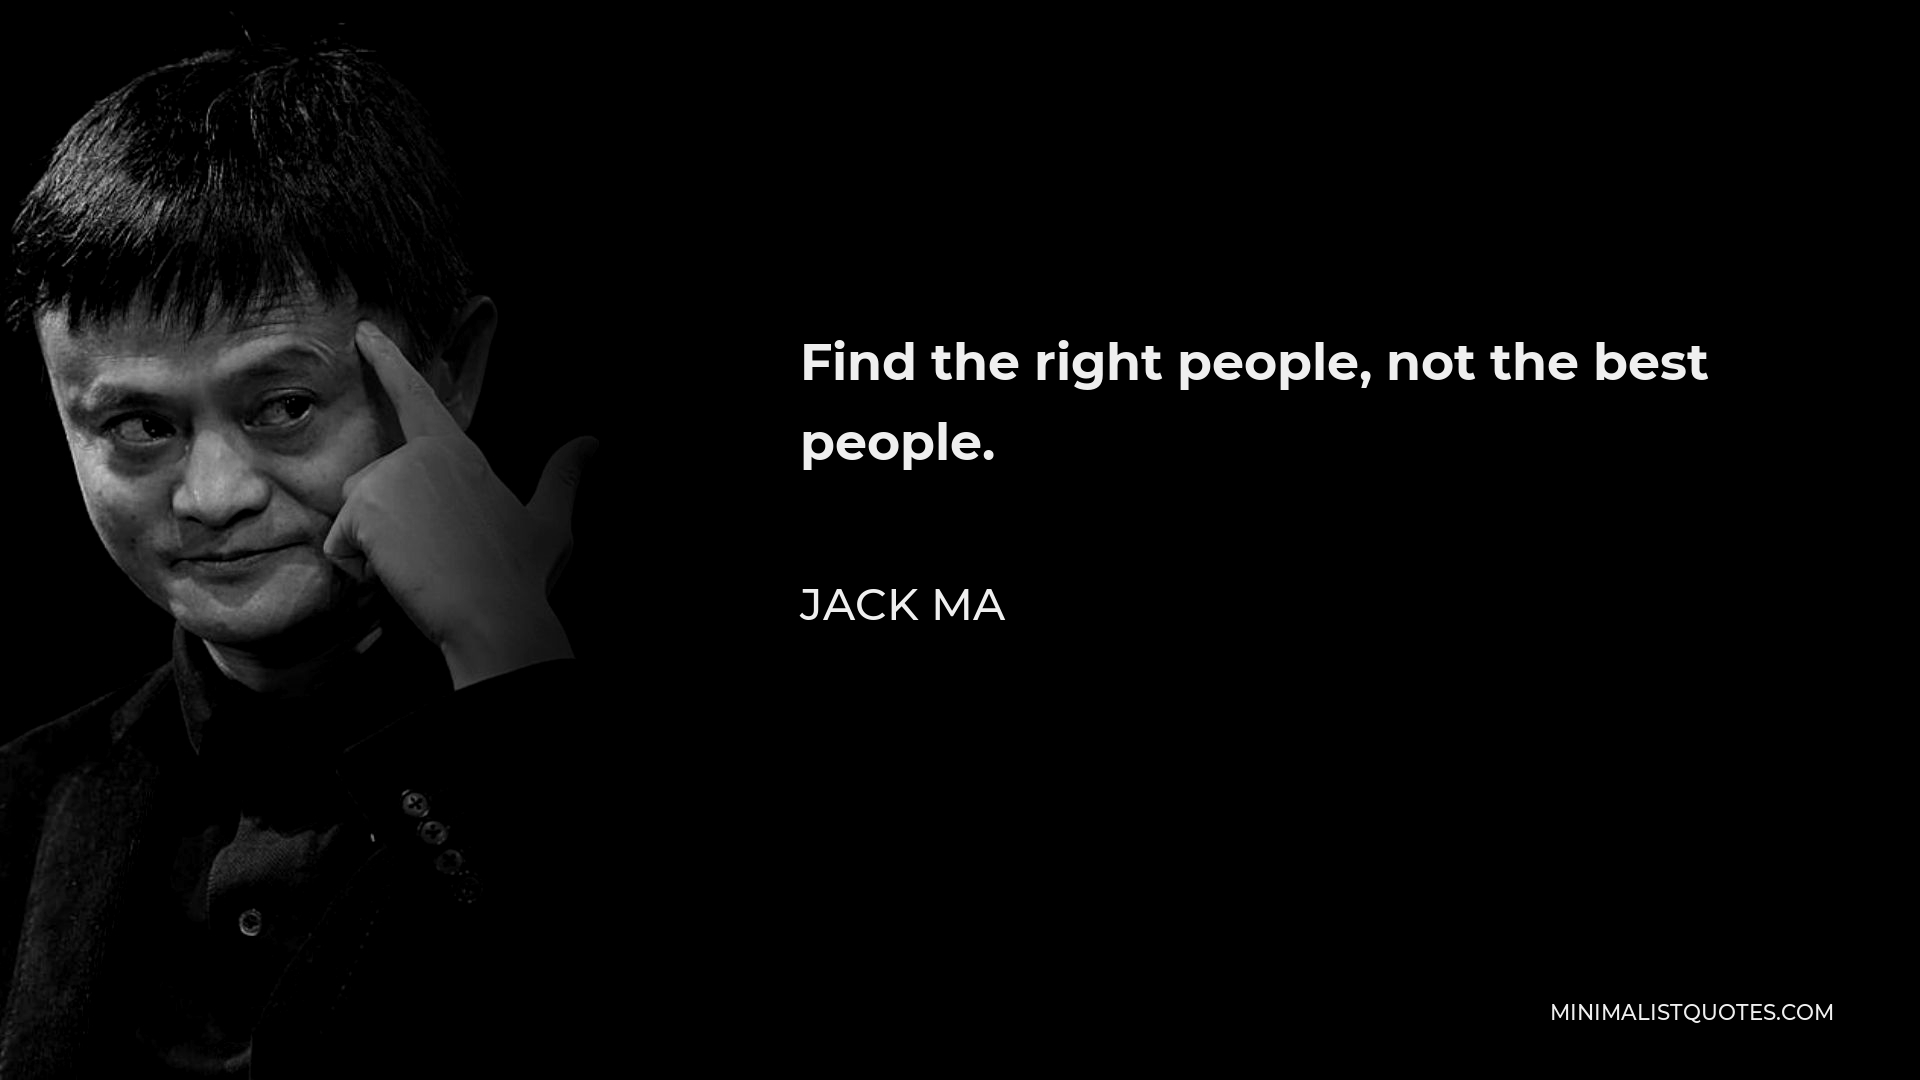 Jack Ma Quote - Find the right people, not the best people.